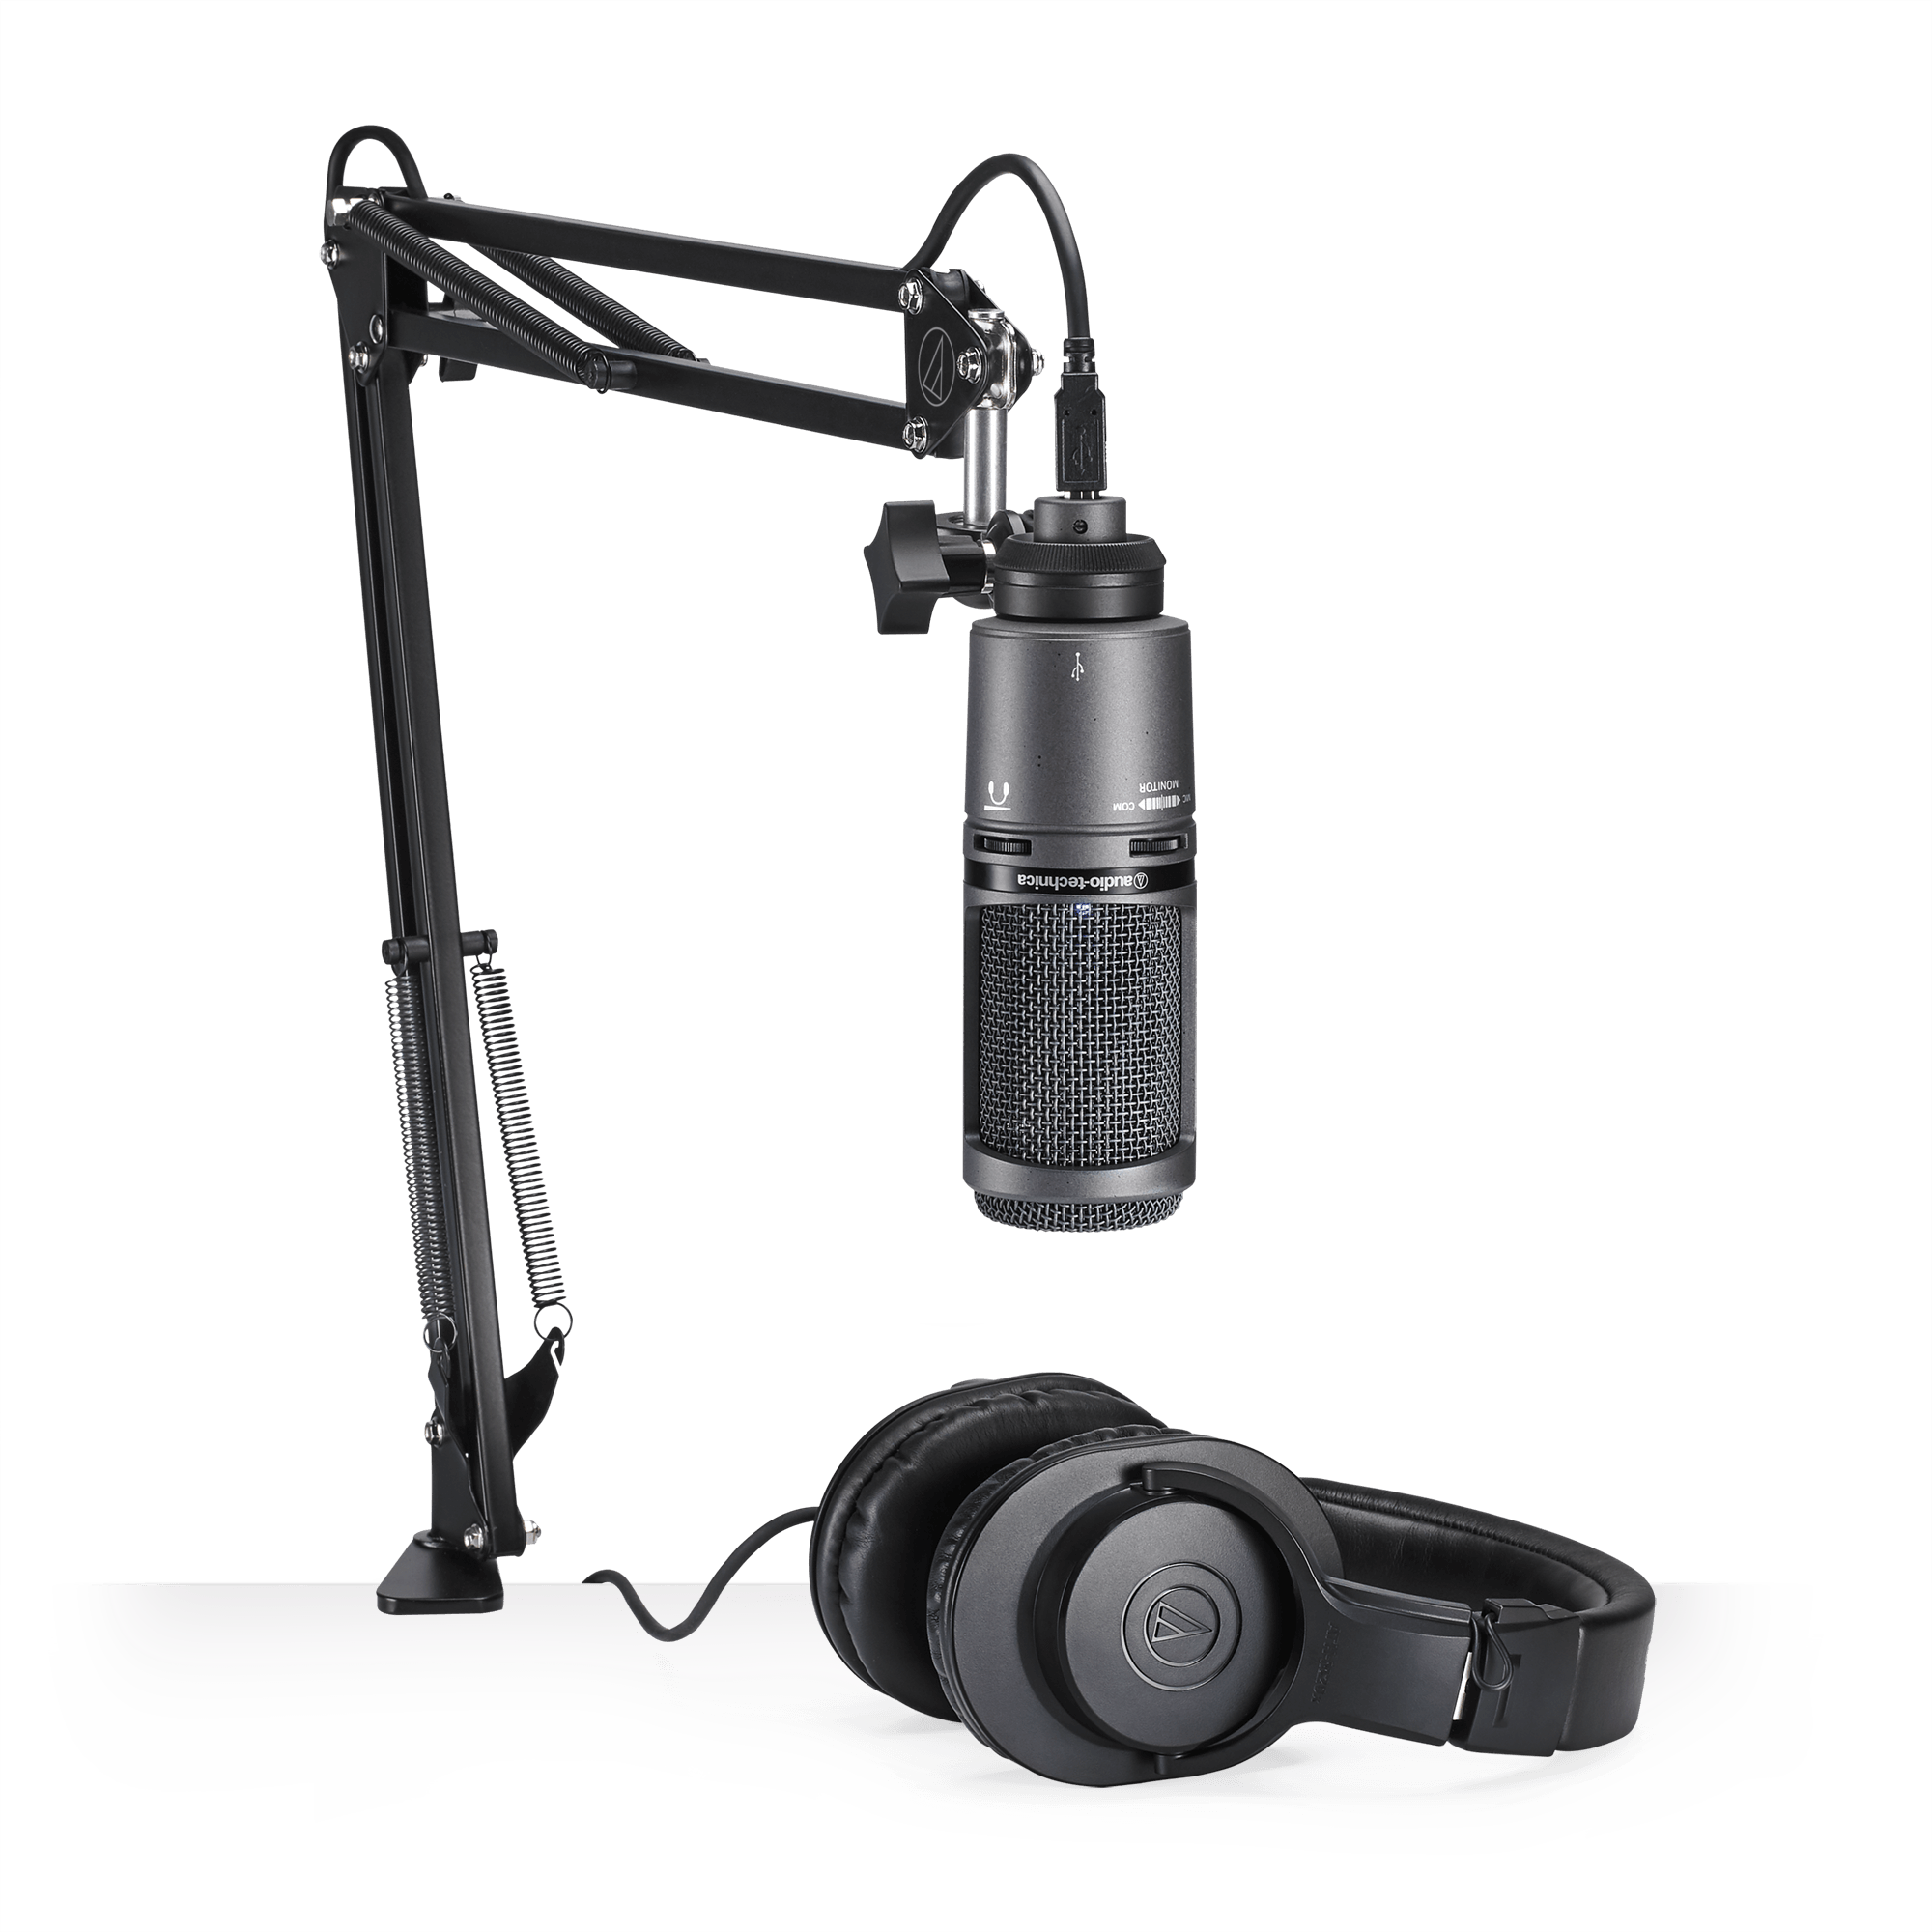 Audio Technica AT2020 Microphone Review